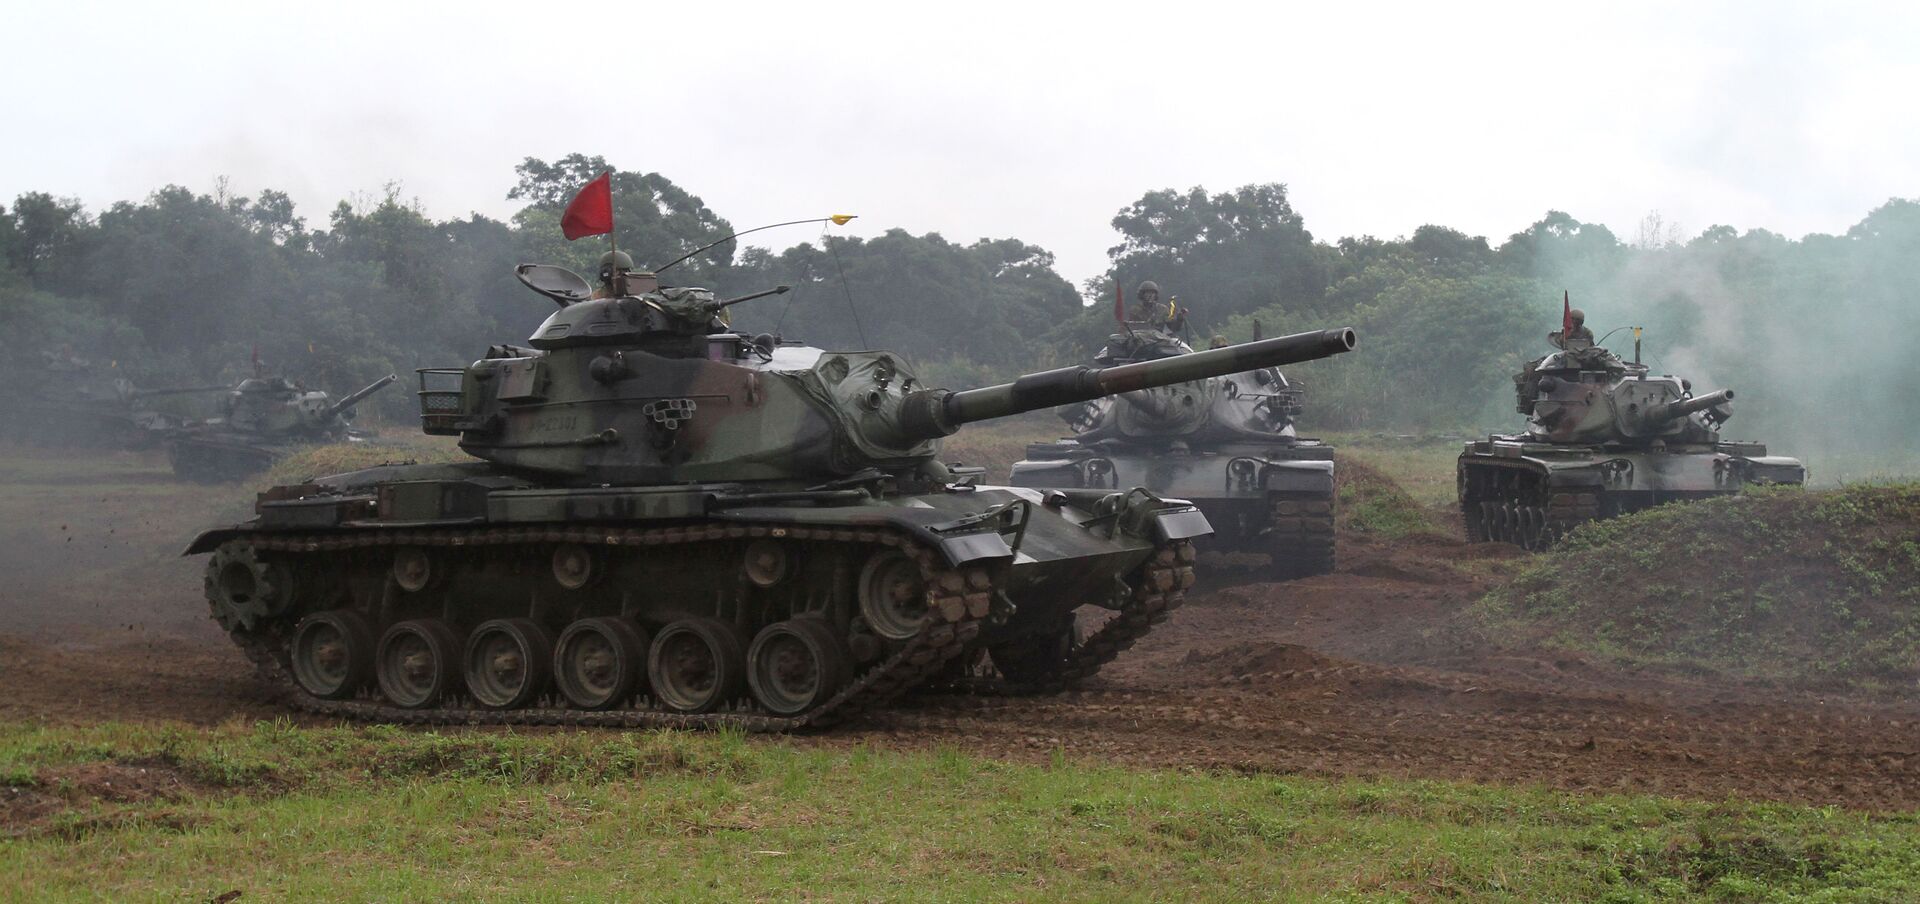 Taiwanese soldiers operate the US-made M60-A3 tanks during a military exercise in Hualien, Taiwan (File) - Sputnik International, 1920, 29.12.2021